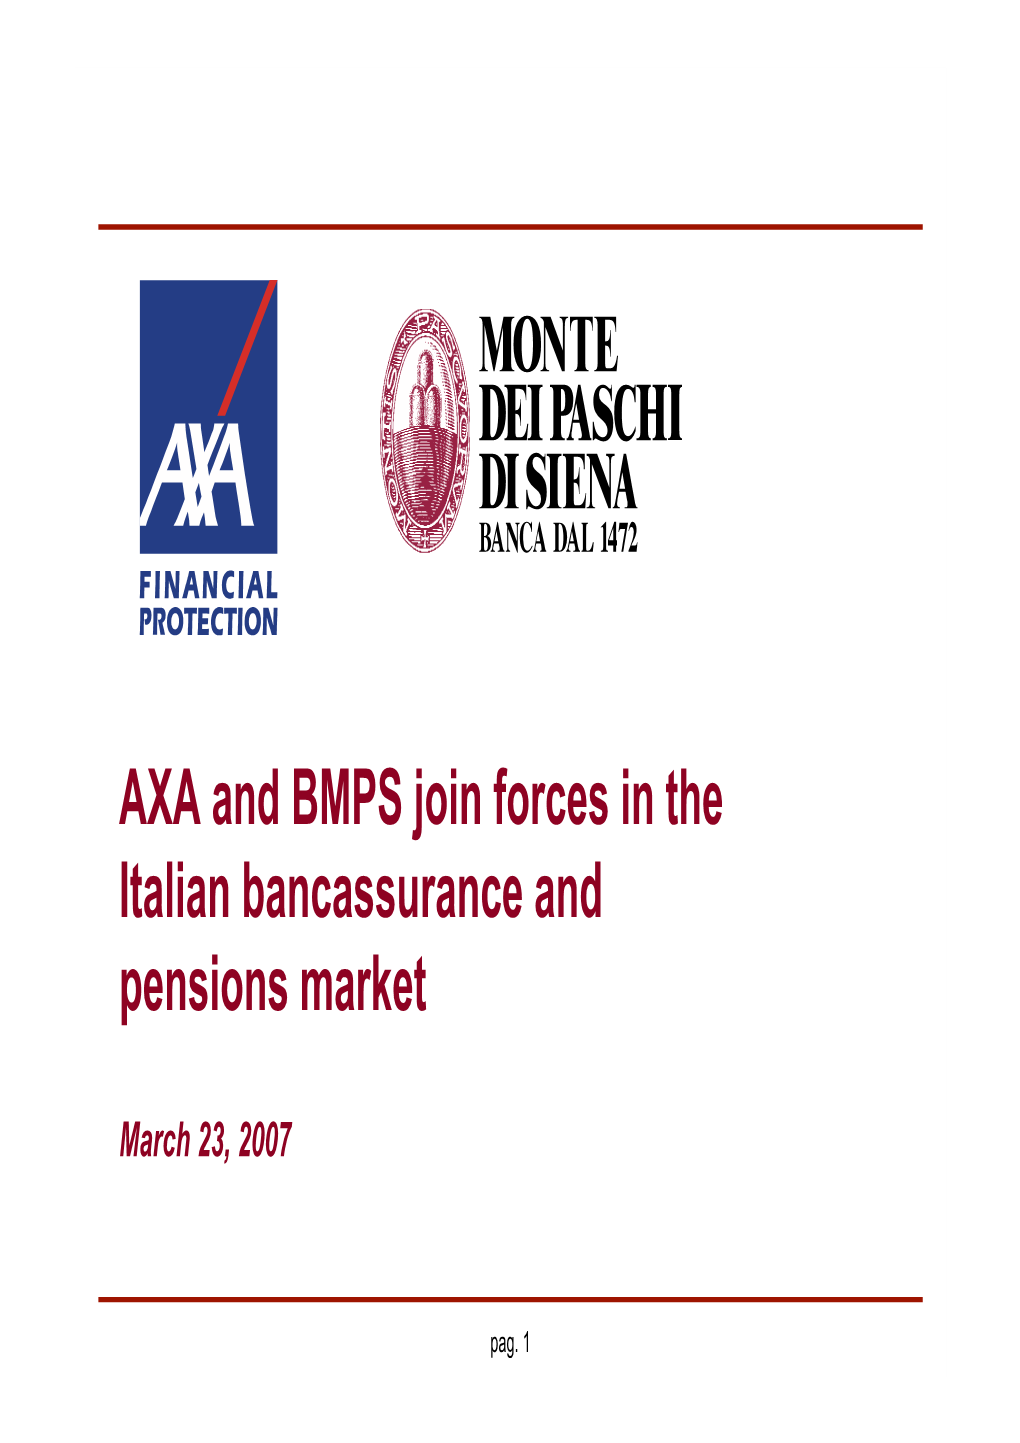 AXA and BMPS Join Forces in the Italian Bancassurance and Pensions Market